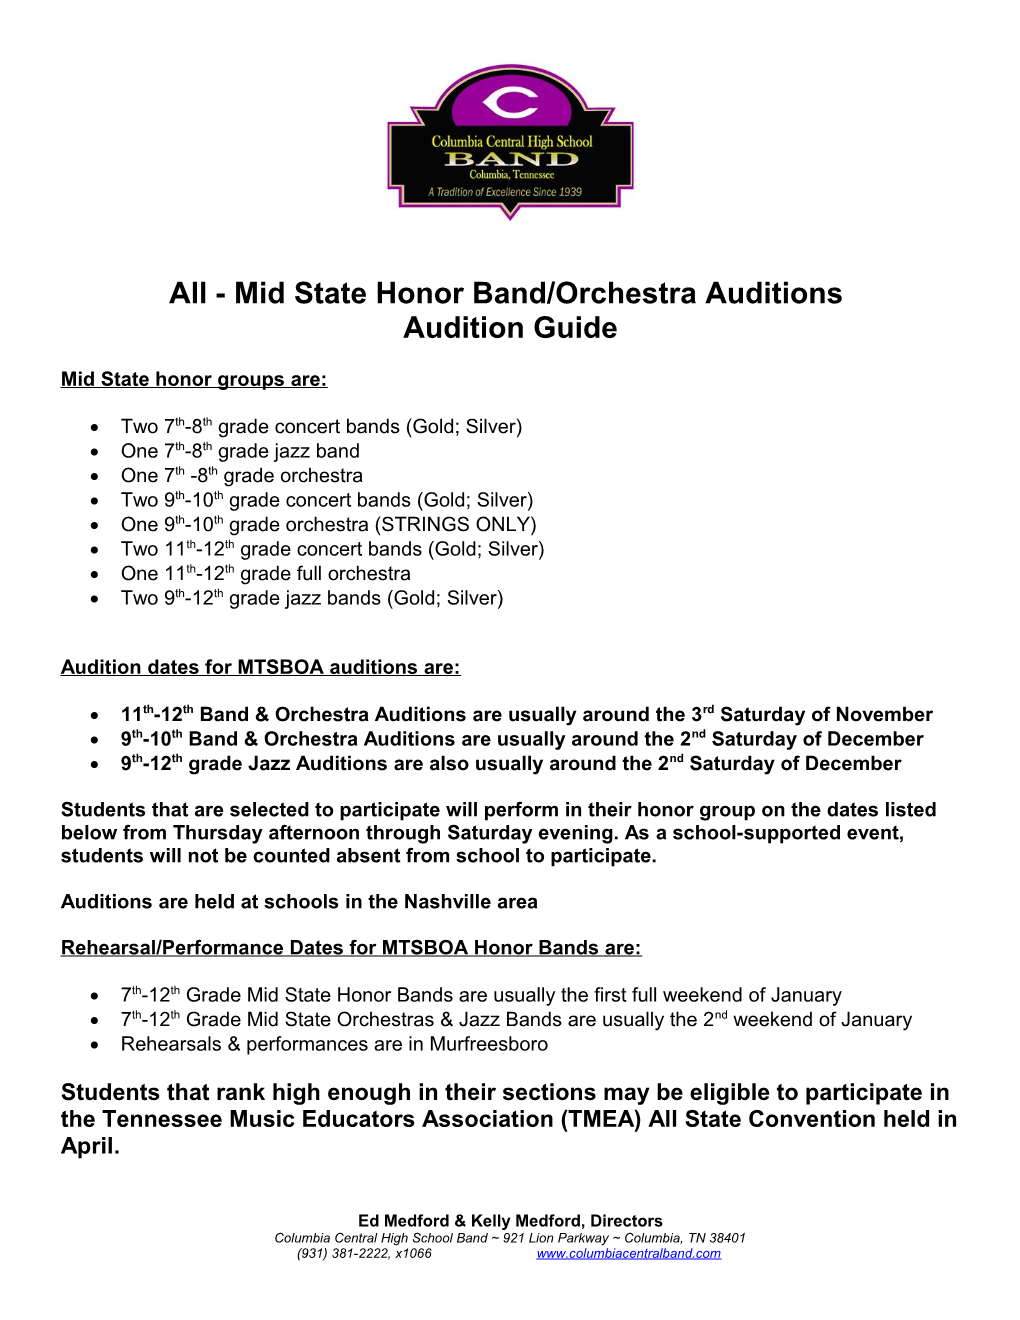 All - Mid State Honor Band/Orchestra Auditions